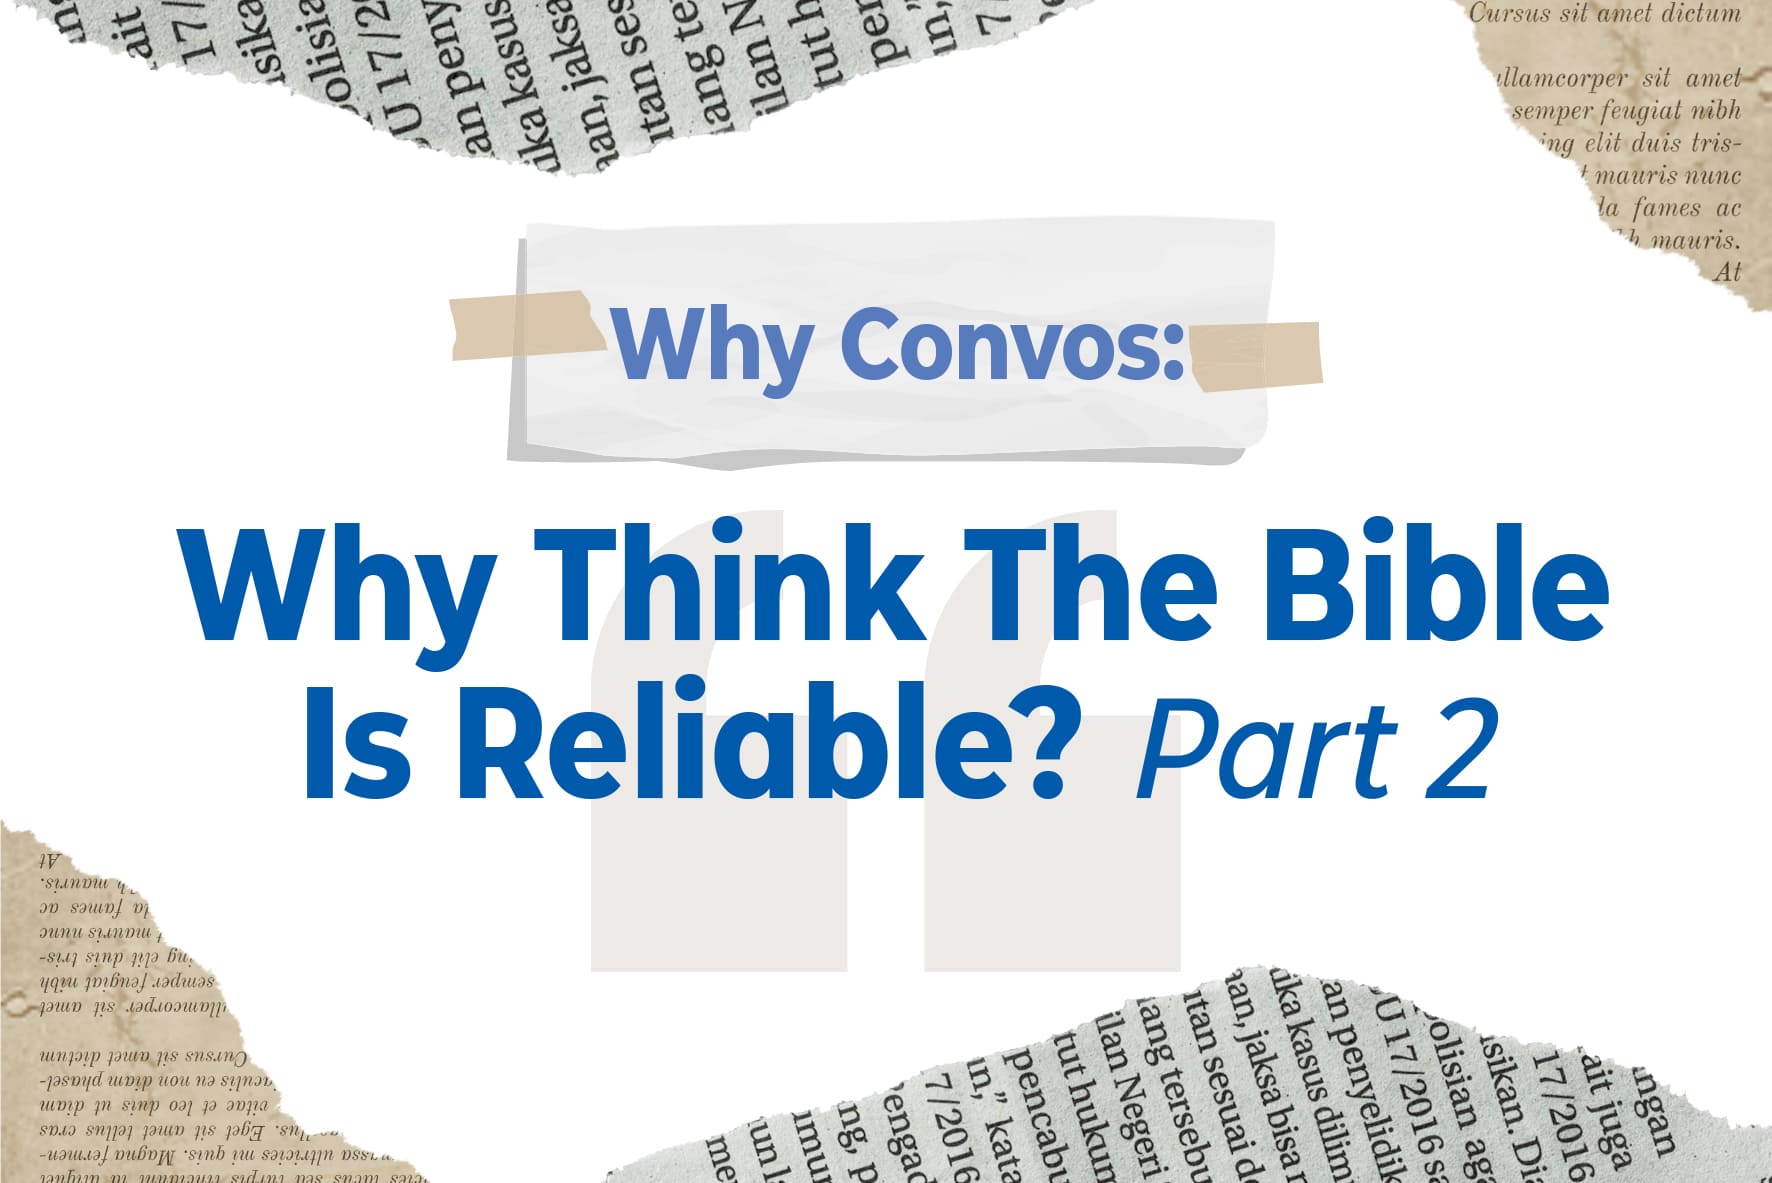 Why Think The Bible Is Reliable? Part 2